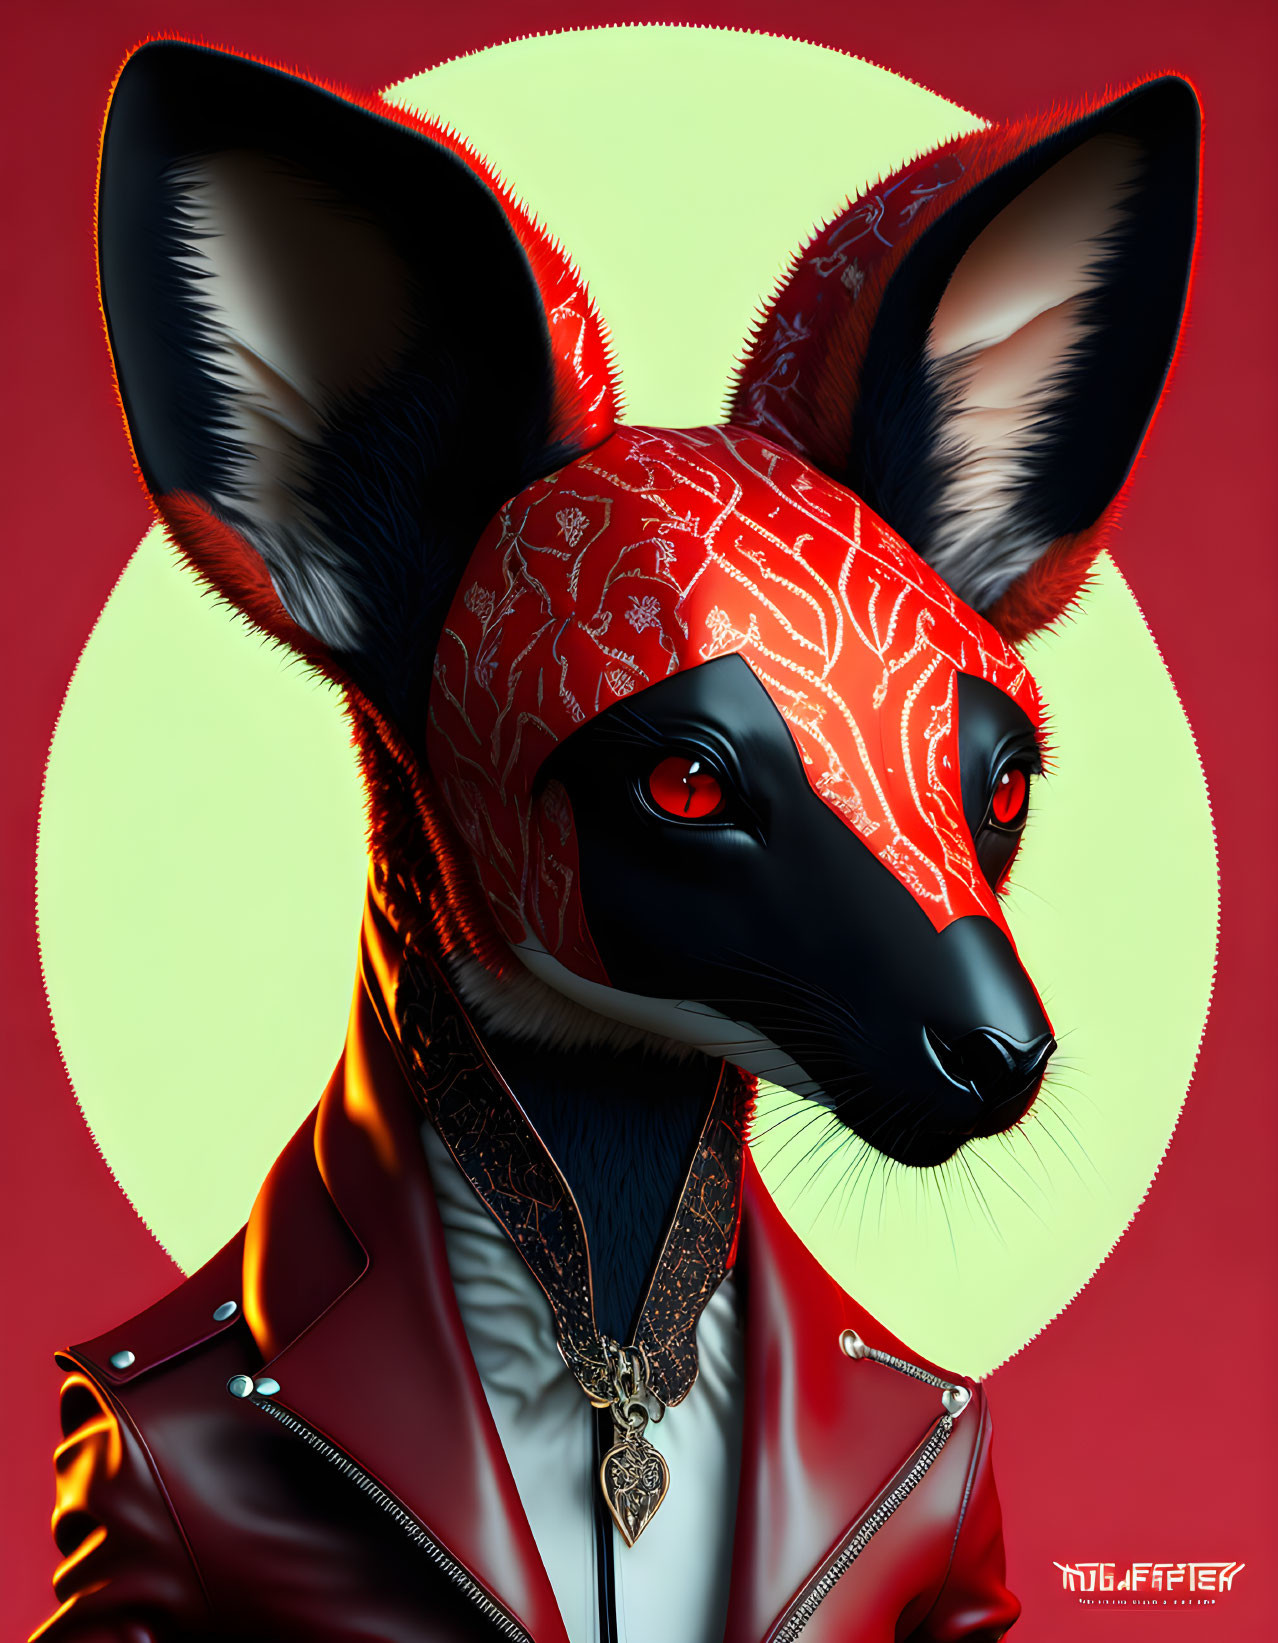 Anthropomorphic fox in red bandana and leather jacket on red-yellow backdrop